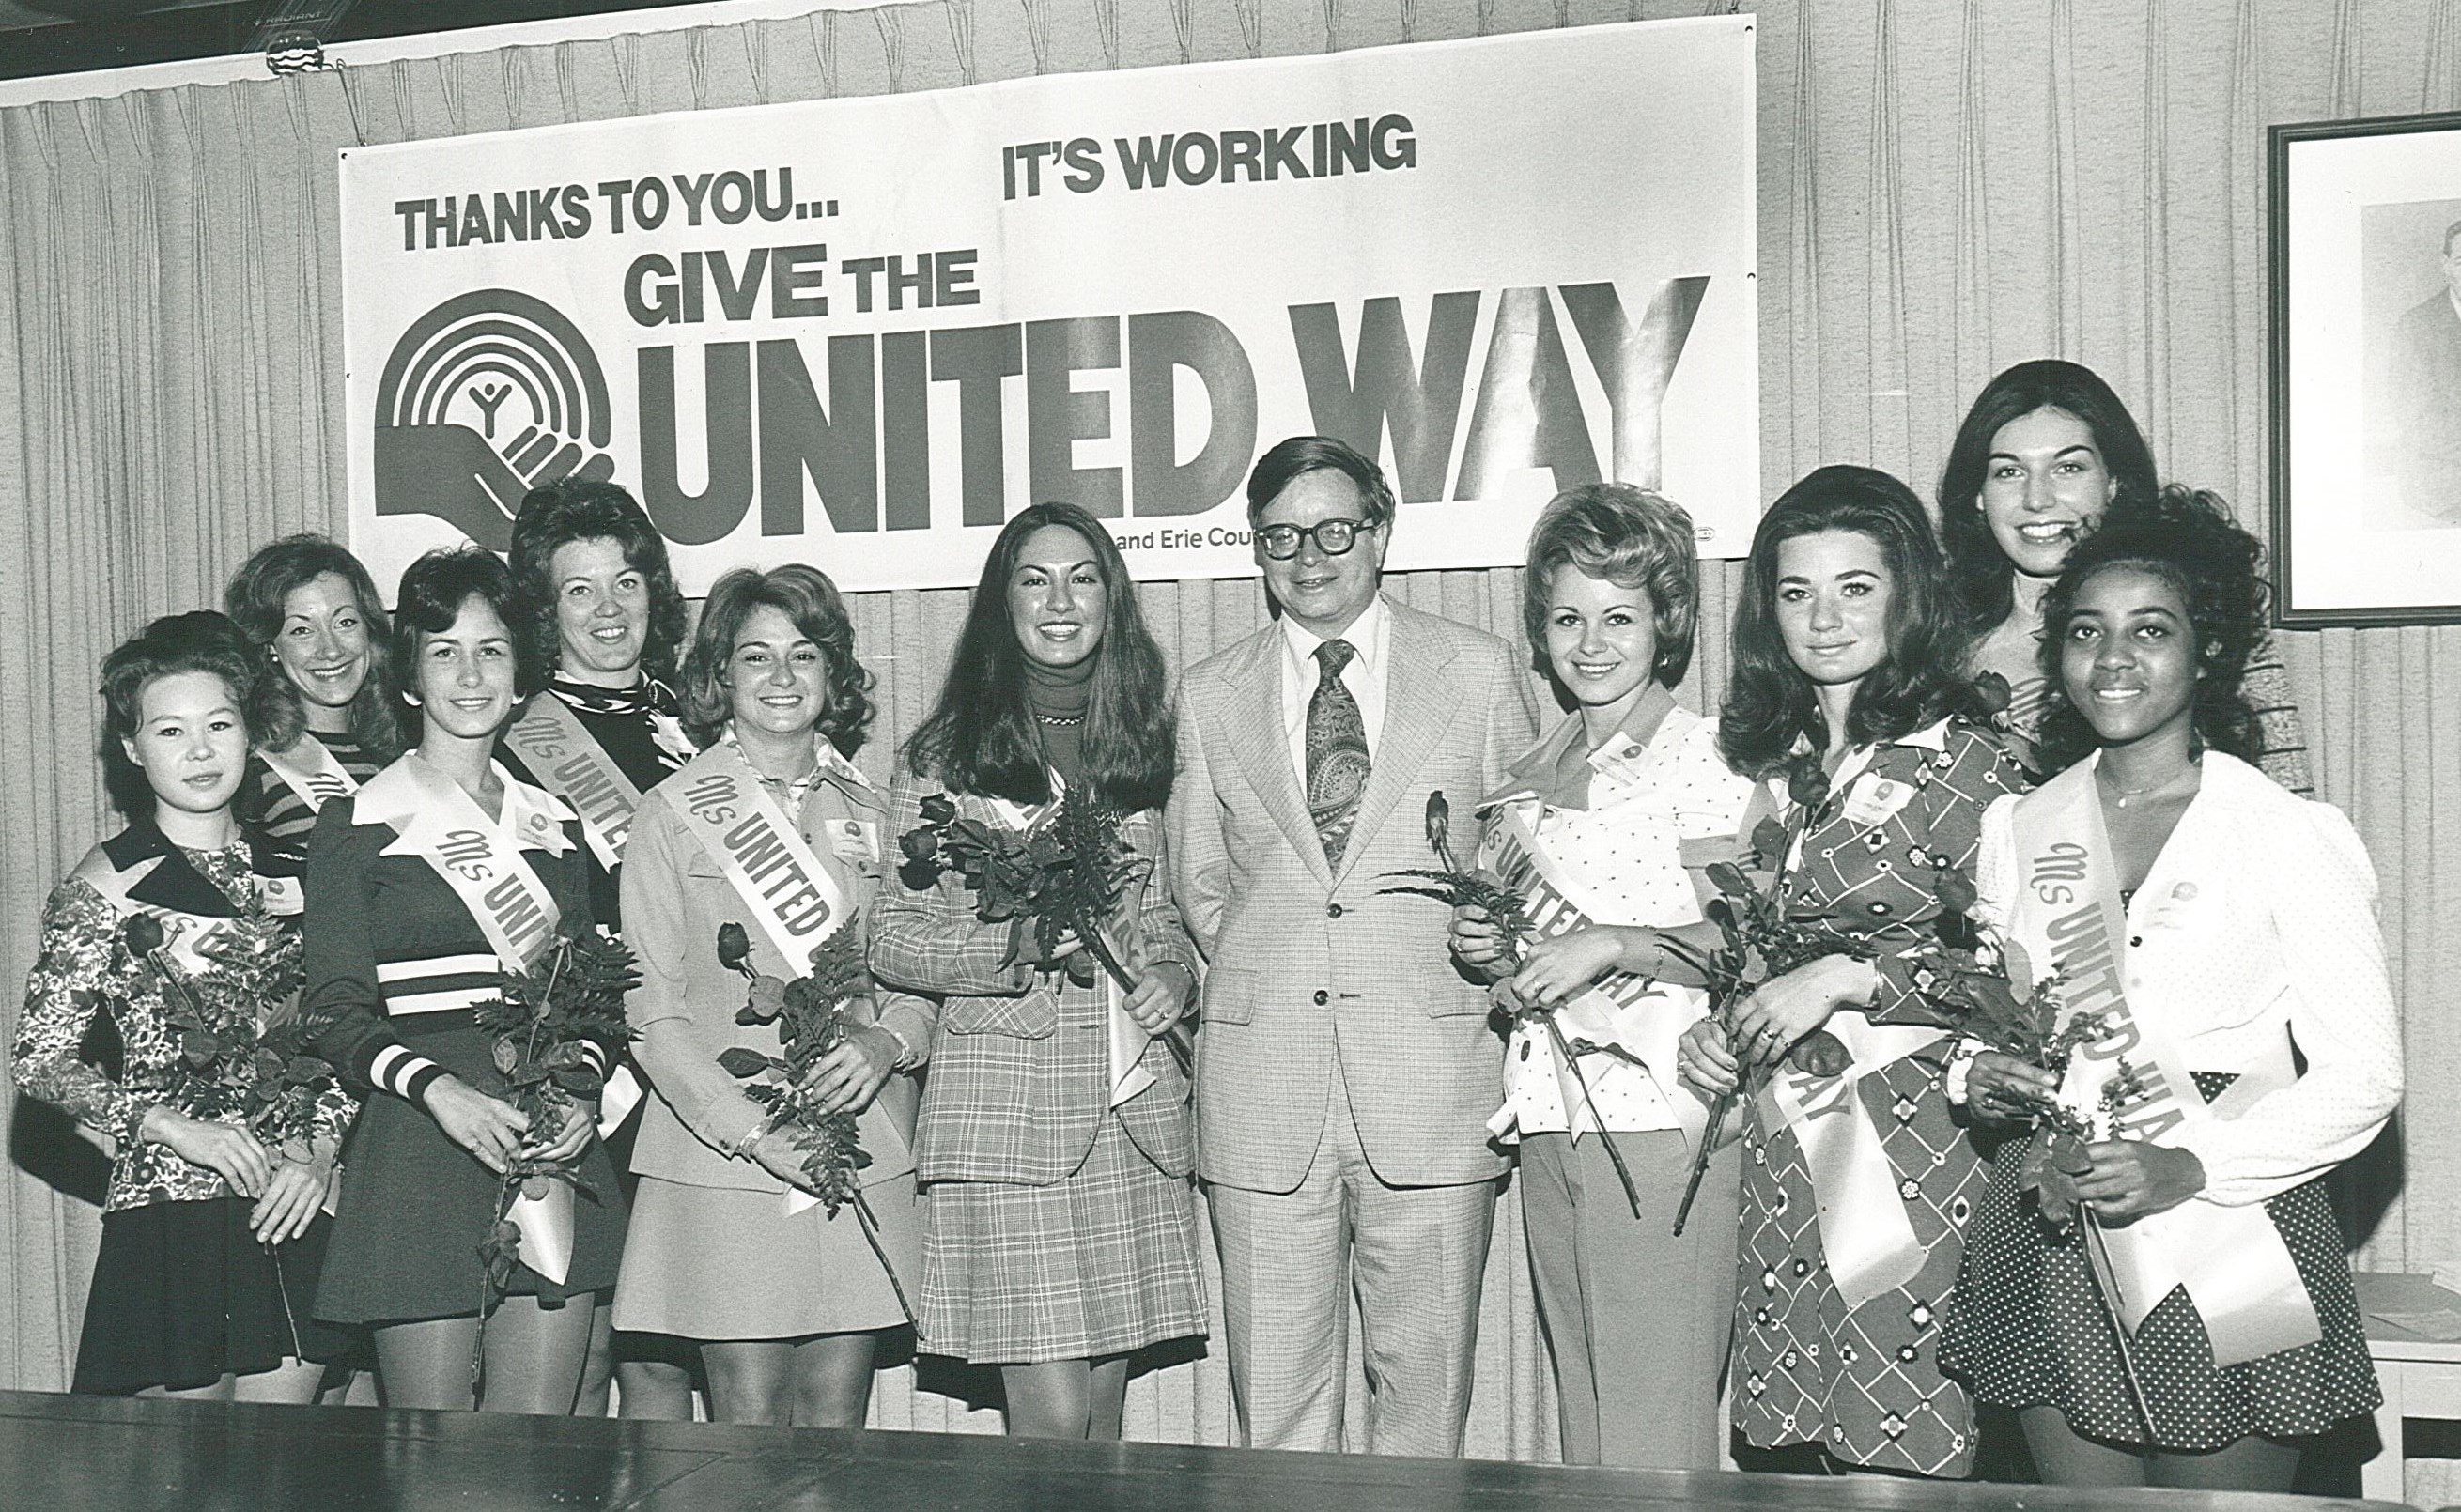 An Old Tradition: Miss United Way Image